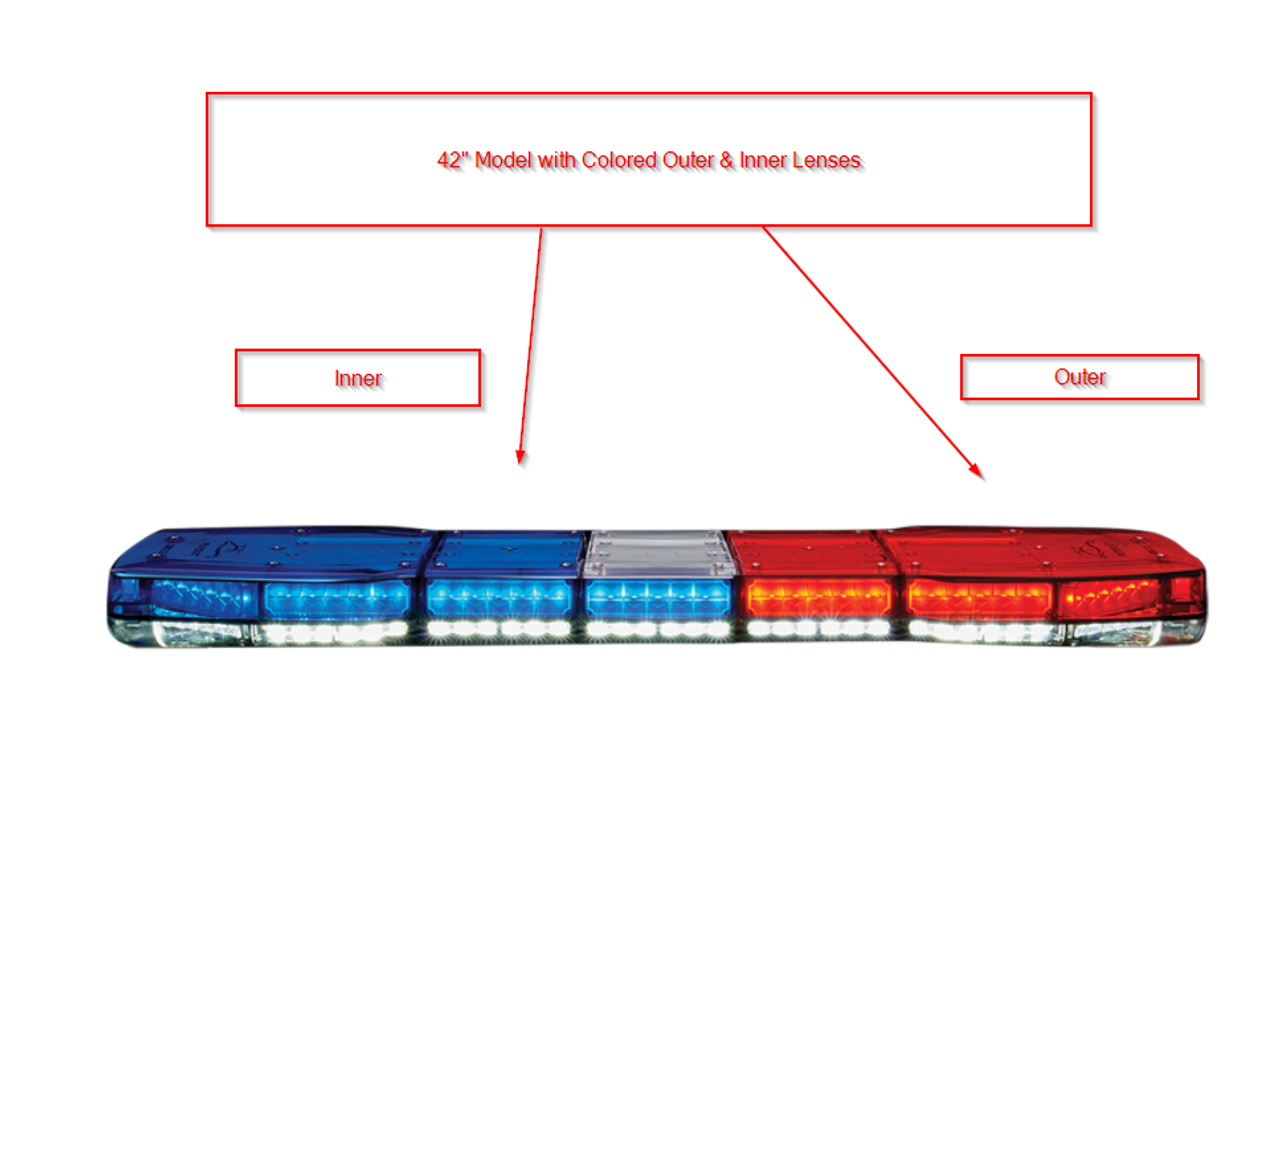 Code-3 Pursuit LED Light Bar, Dual Levels of Lighting Create Unique & Intense Flash Patterns, choose 42 47 or 53 inch, includes mounting hardware